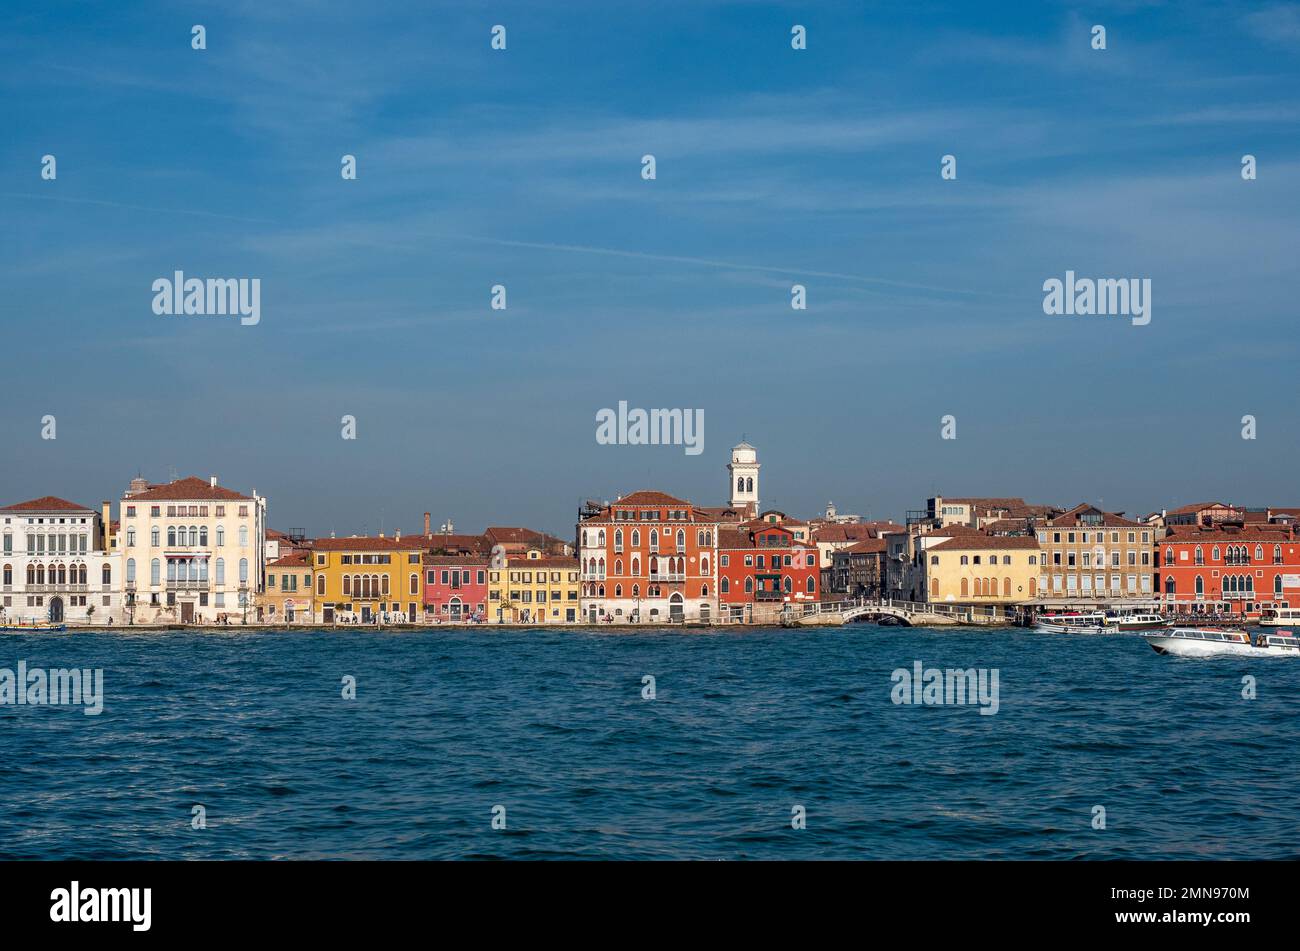 View of the city of Venice, Italy. Tourism concept. Stock Photo